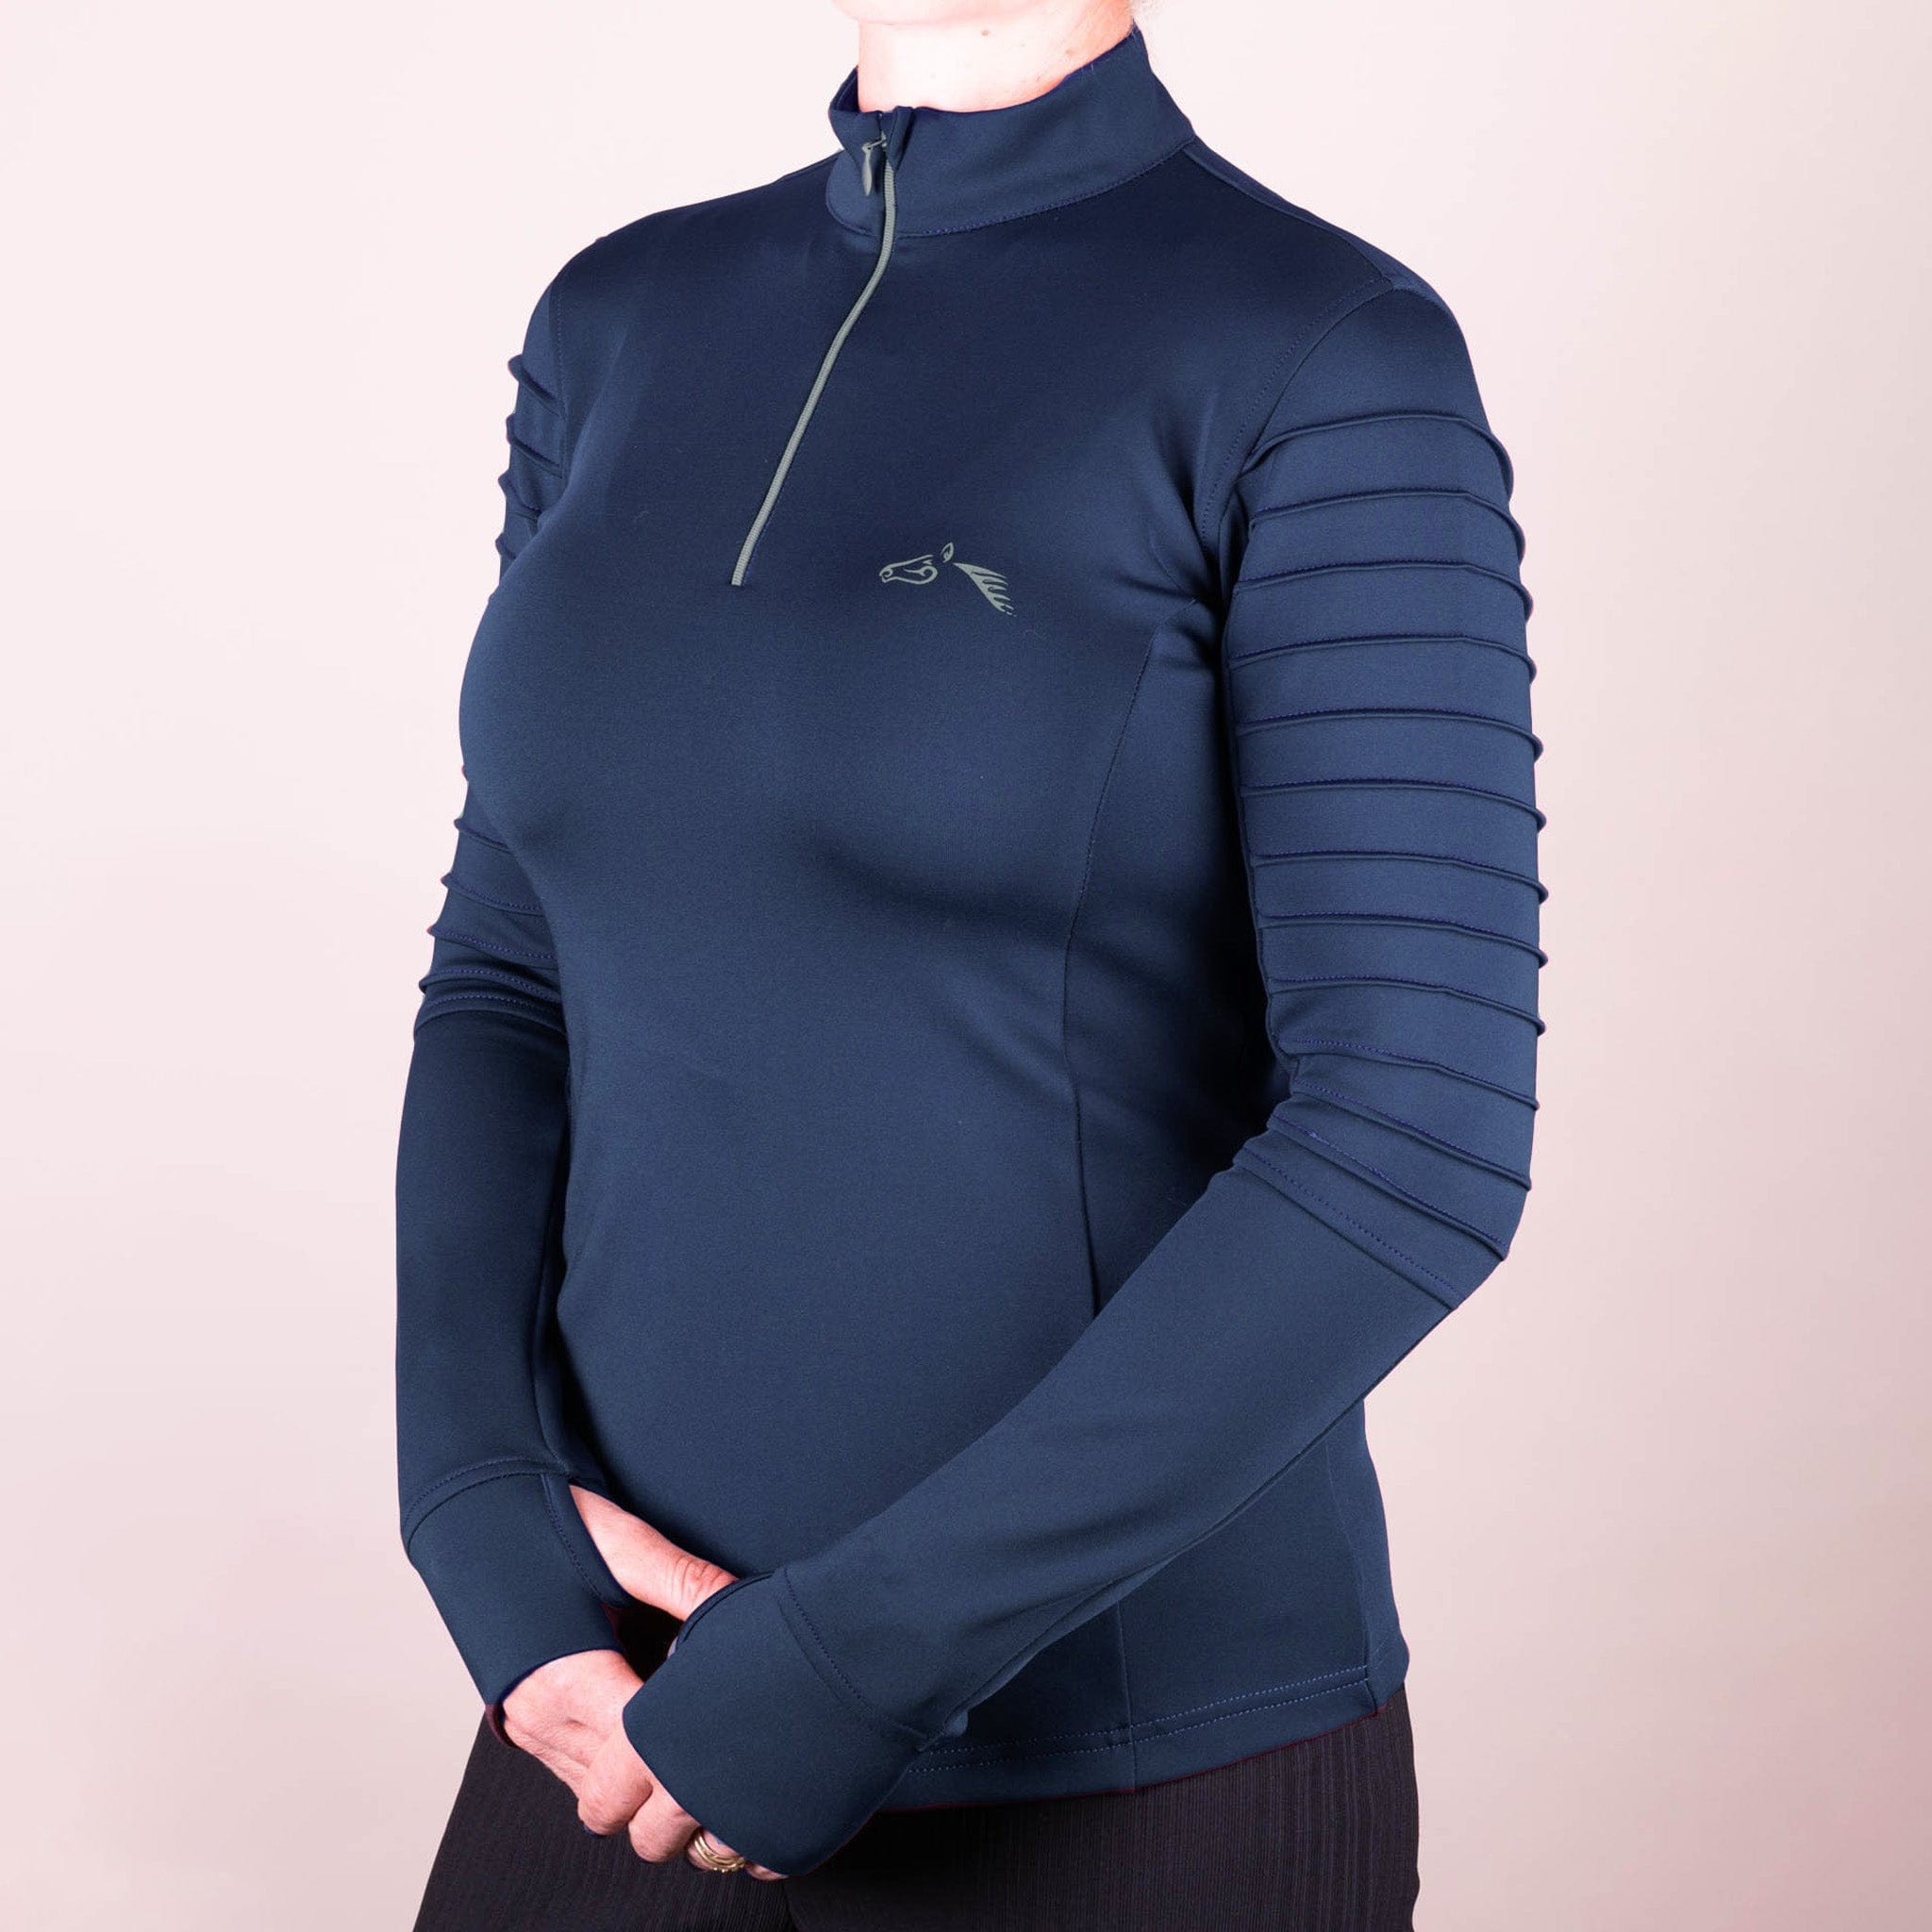 Gallop Sophia Long Sleeve Base Layer B161 Navy Front On Model